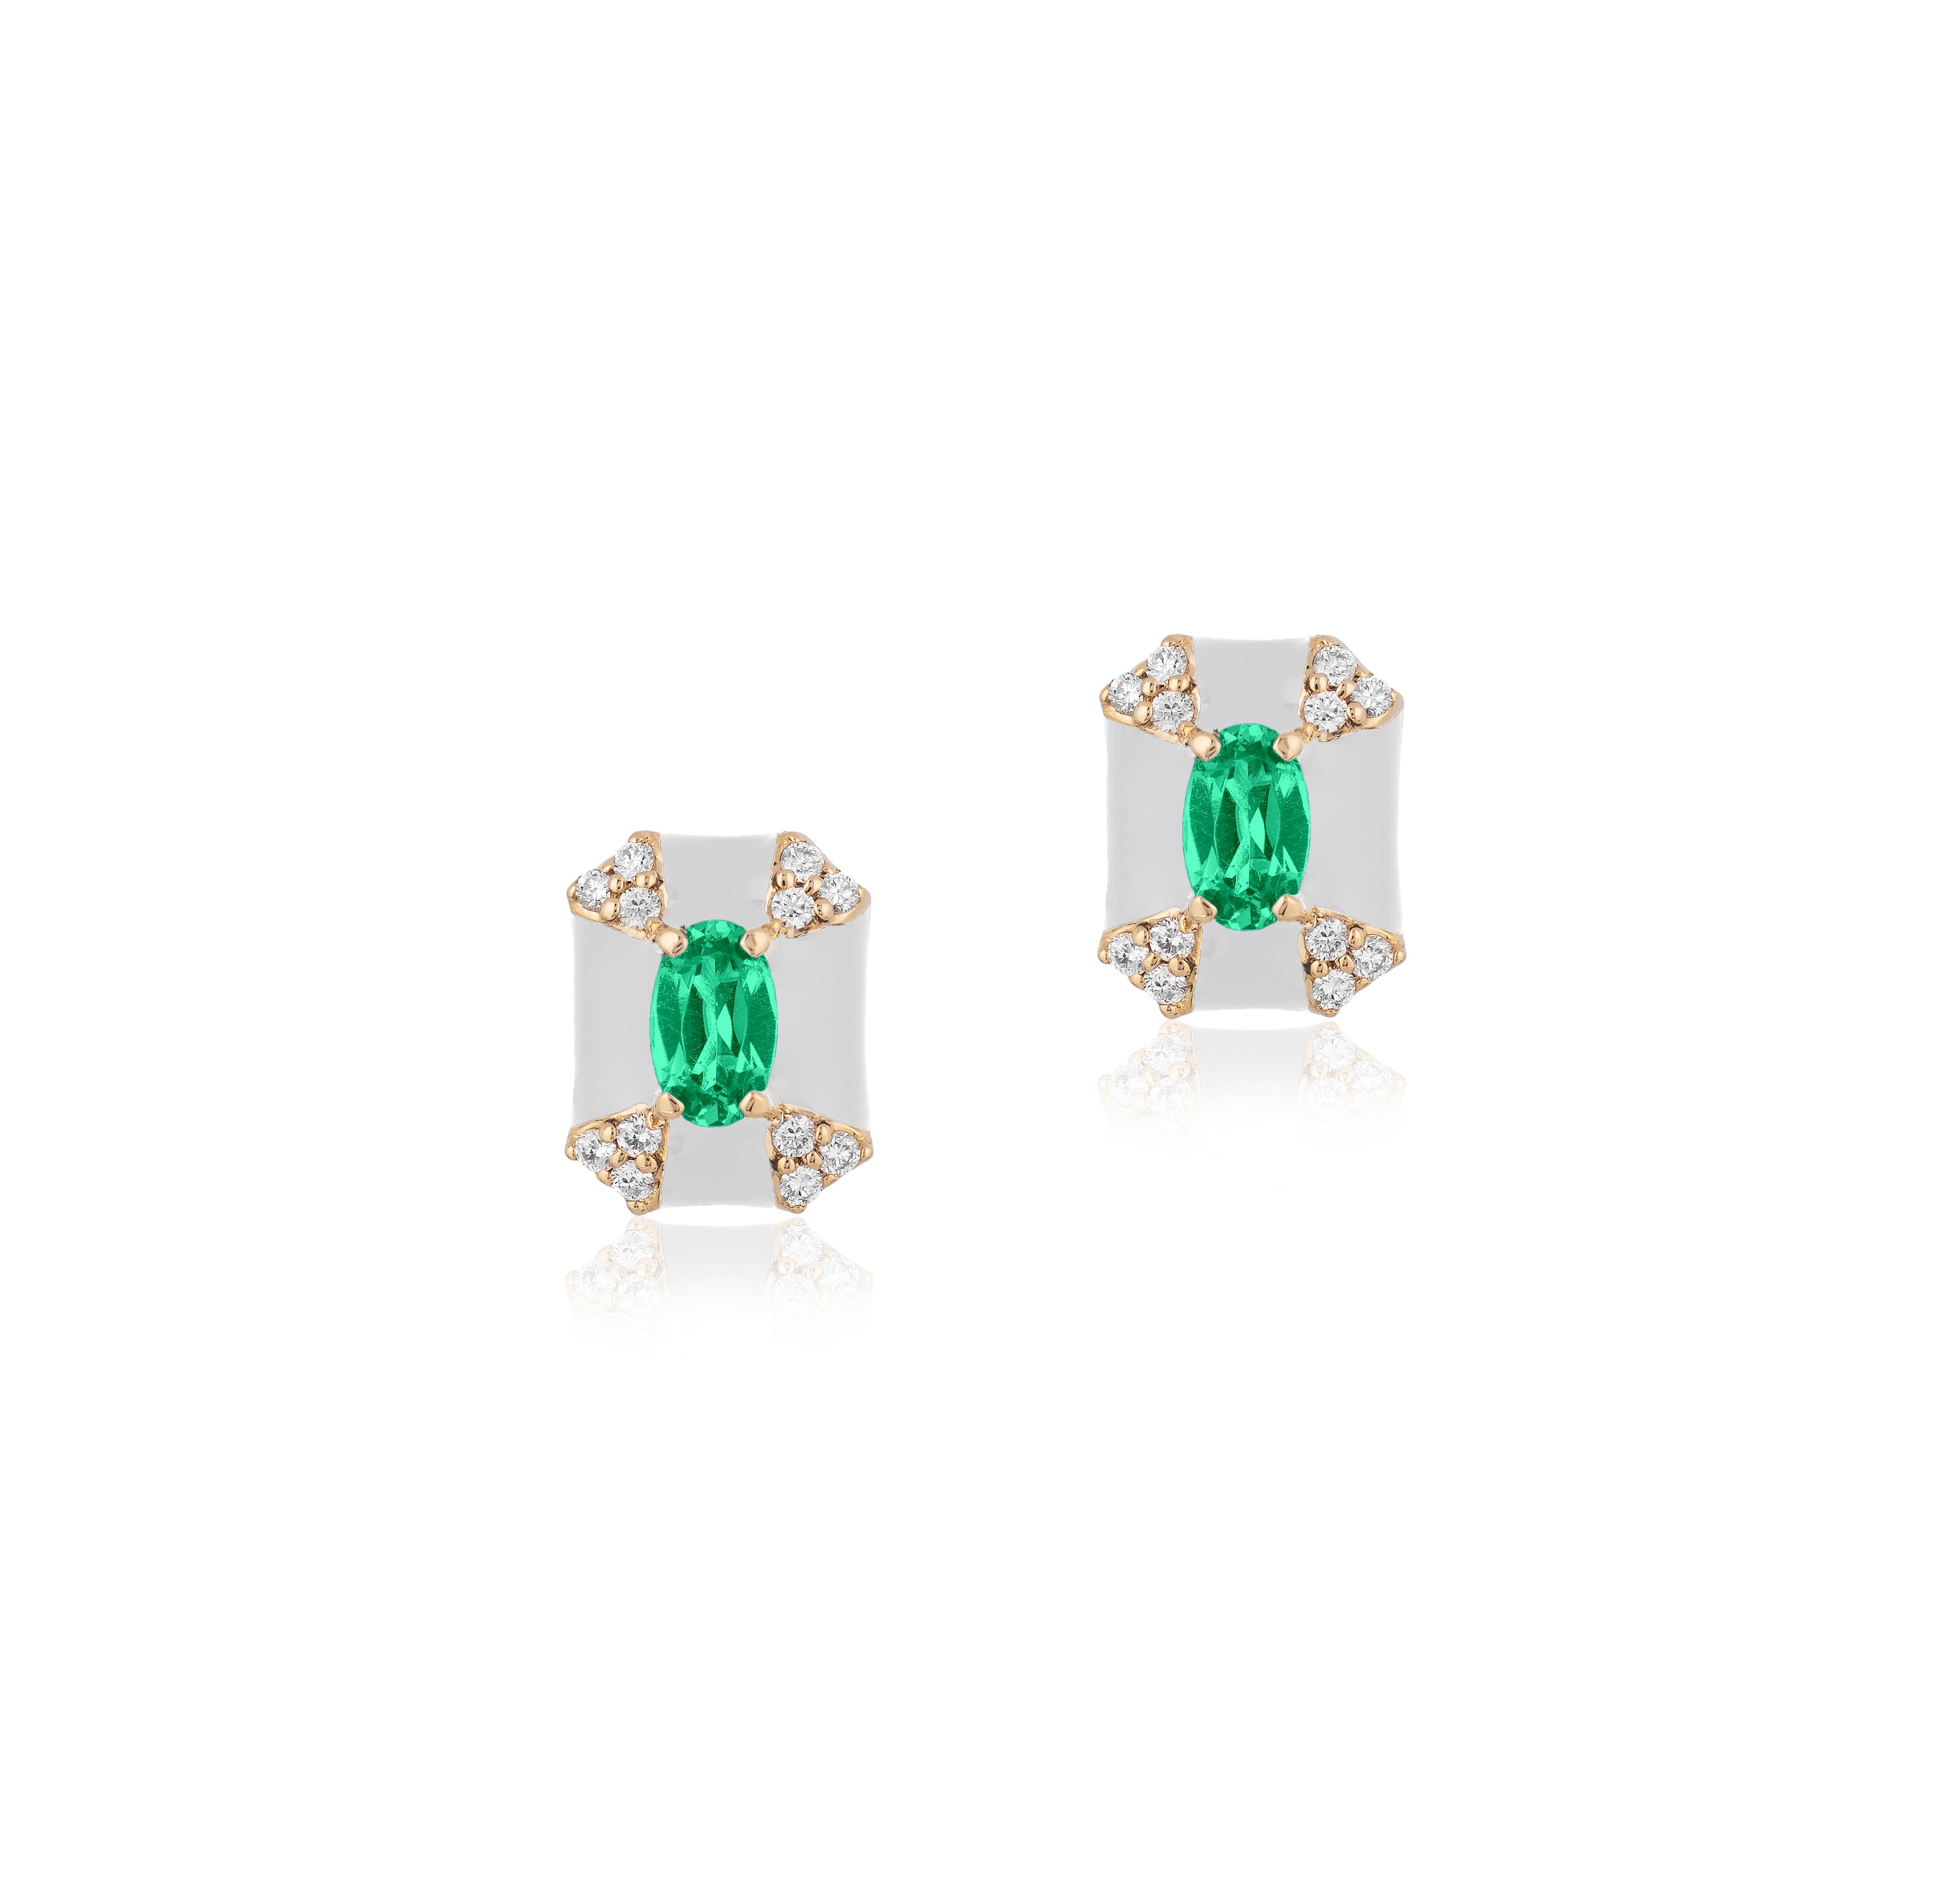 Contemporary Goshwara Octagon White Enamel with Emerald and Diamonds Stud Earrings For Sale